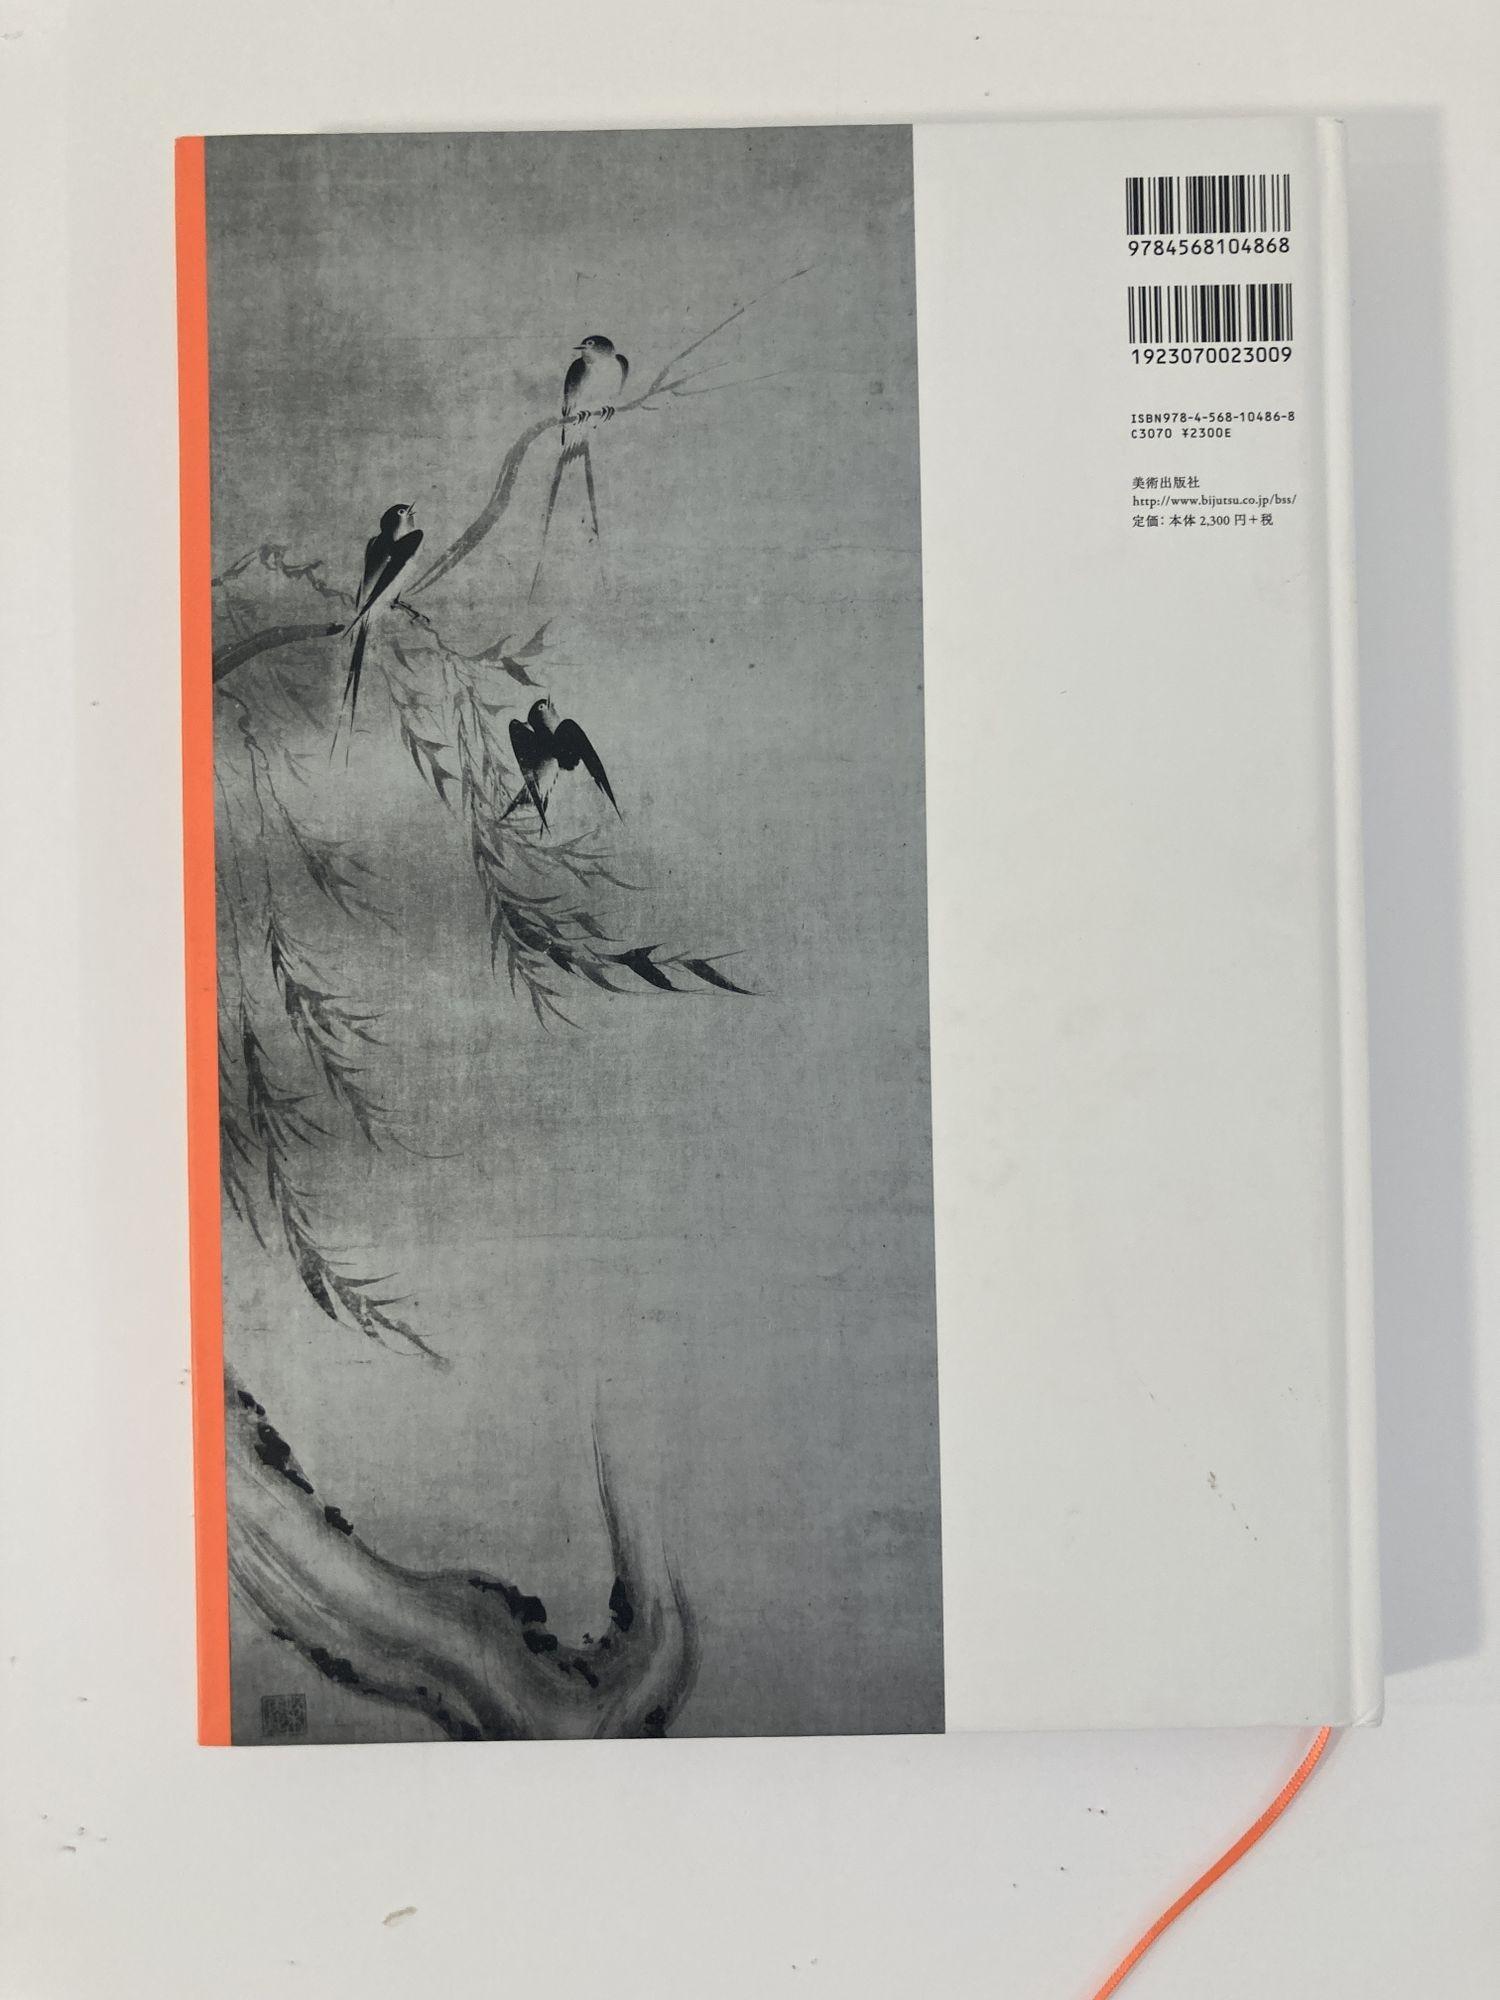 Masterpieces from the sanso collection: Japanese Paintings by Peter F. Drucker and Doris Drucker.
Hardcover catalogue Book.
Text in English and Japanese.
Luxe edition.
For over 30 years, economist and “father of management” Peter Drucker